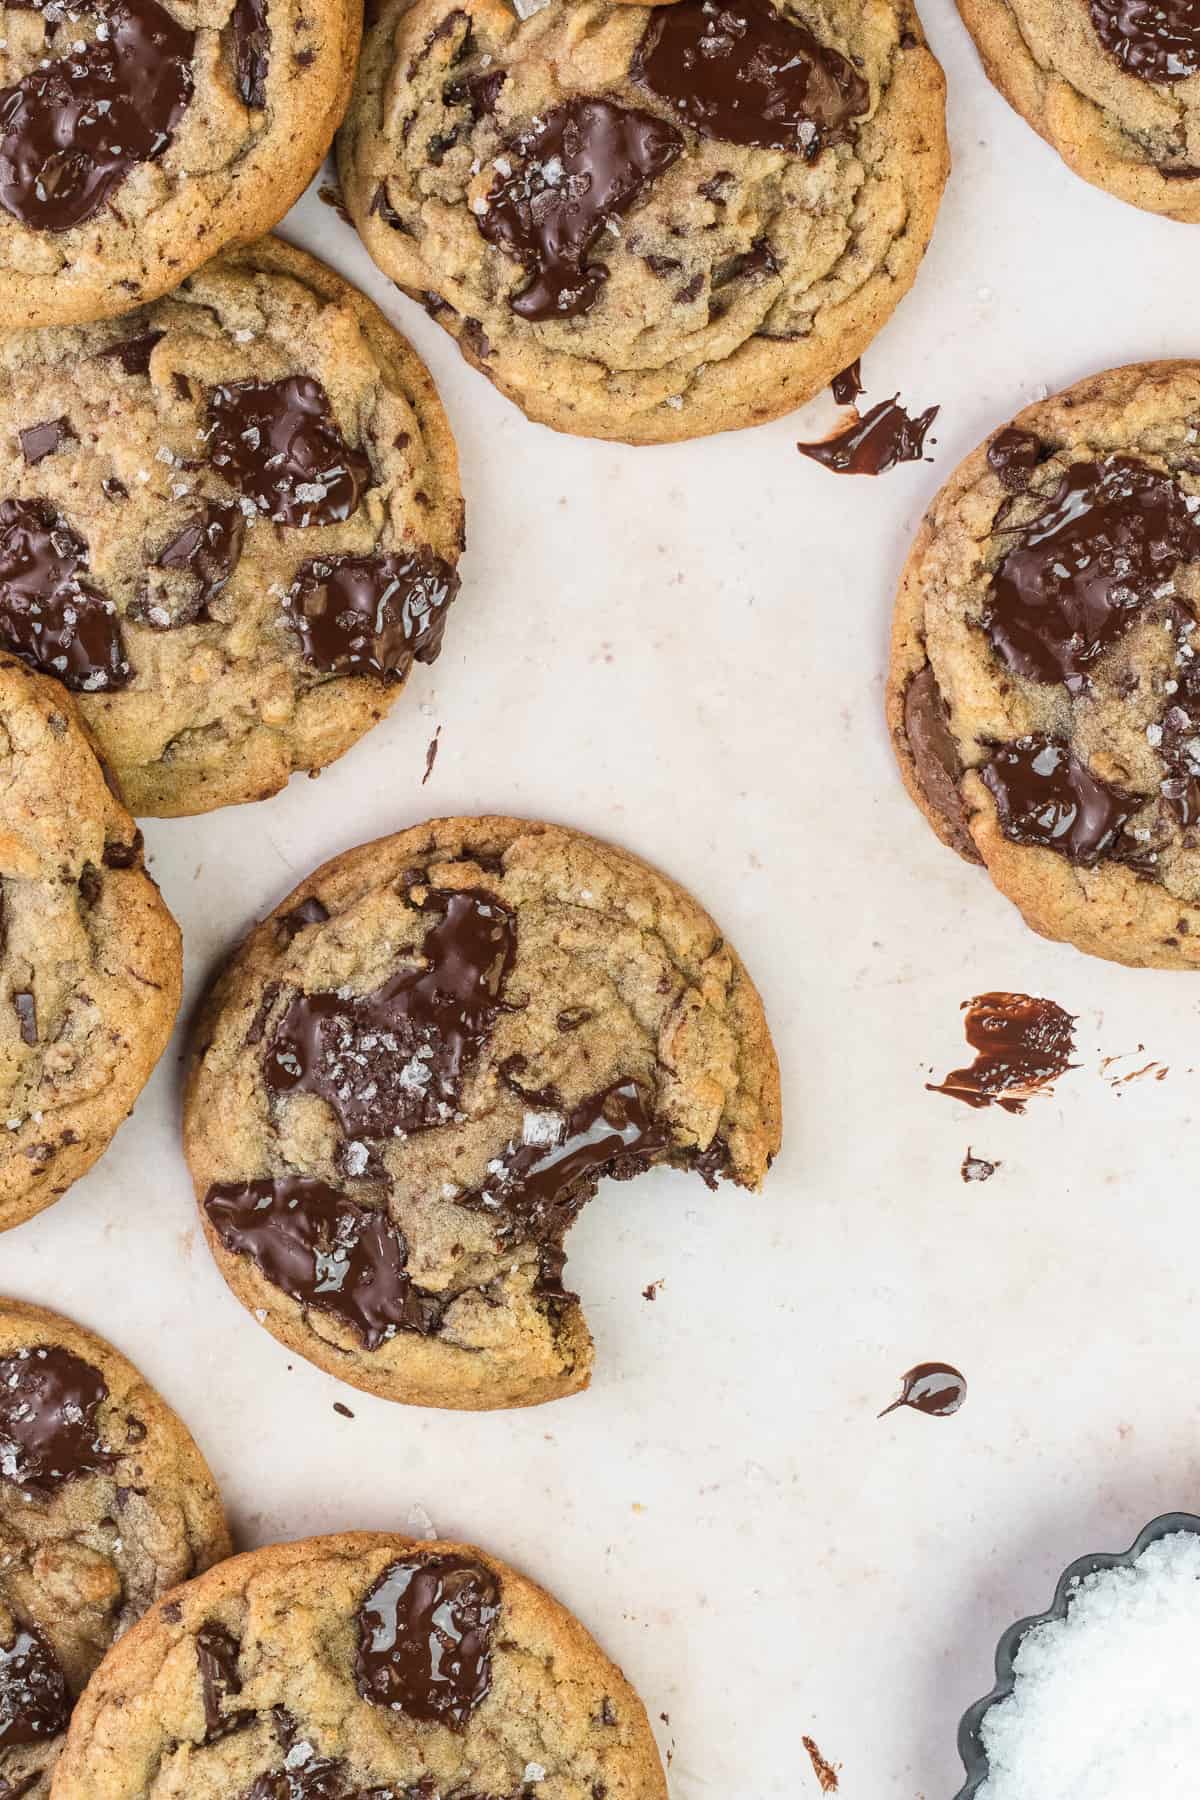 A pile of Nutella Chocolate Chip Cookies with one cookie missing a bite out of it.